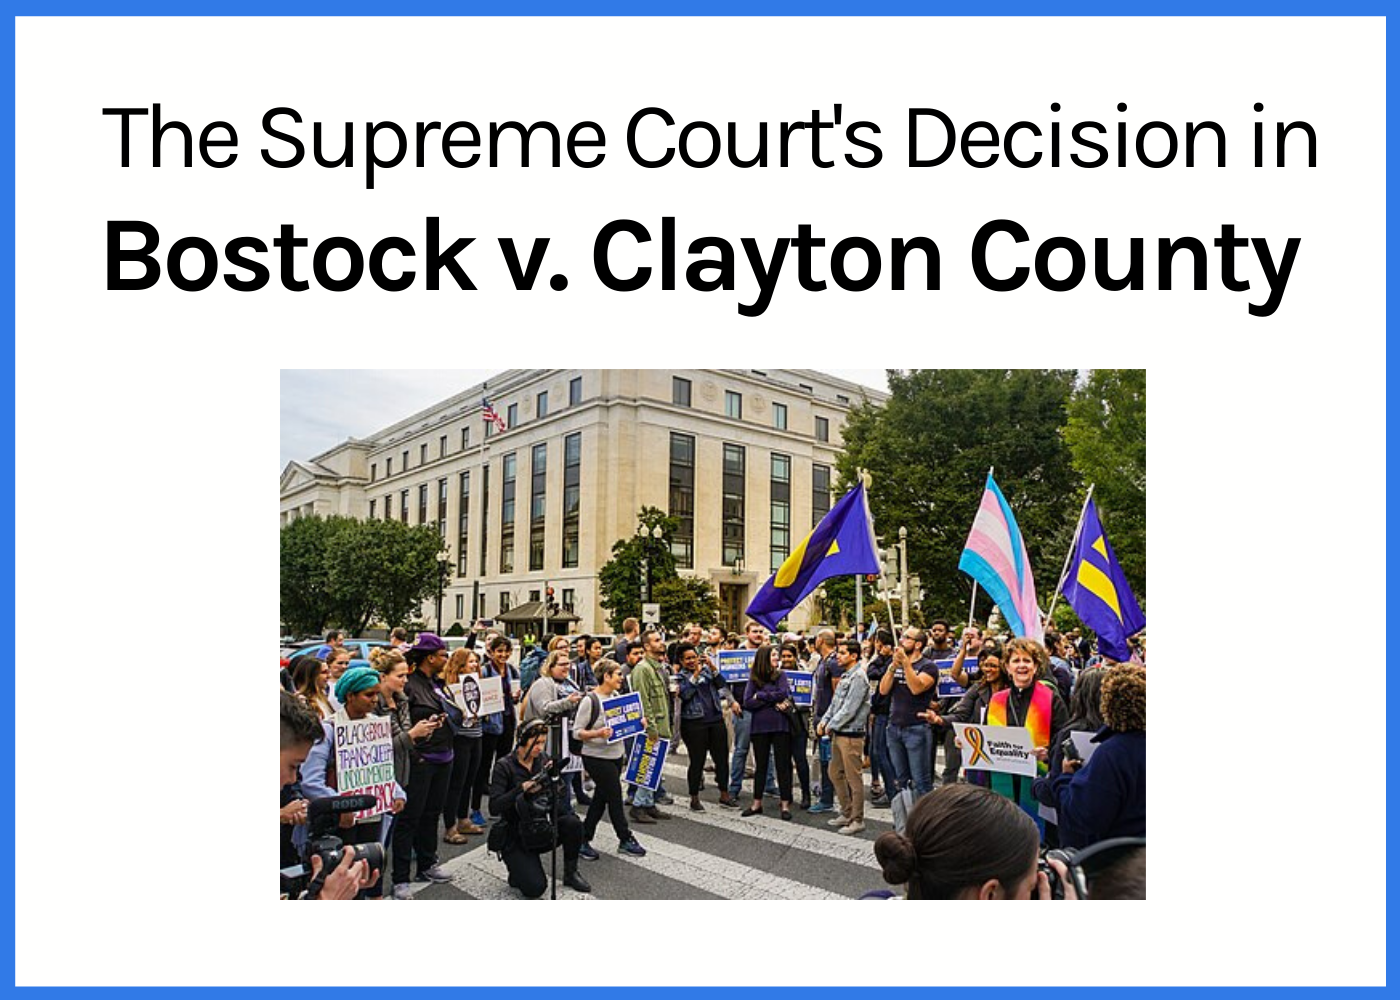 Catflaps- The Supreme Court’s Decision in Bostock v. Clayton County